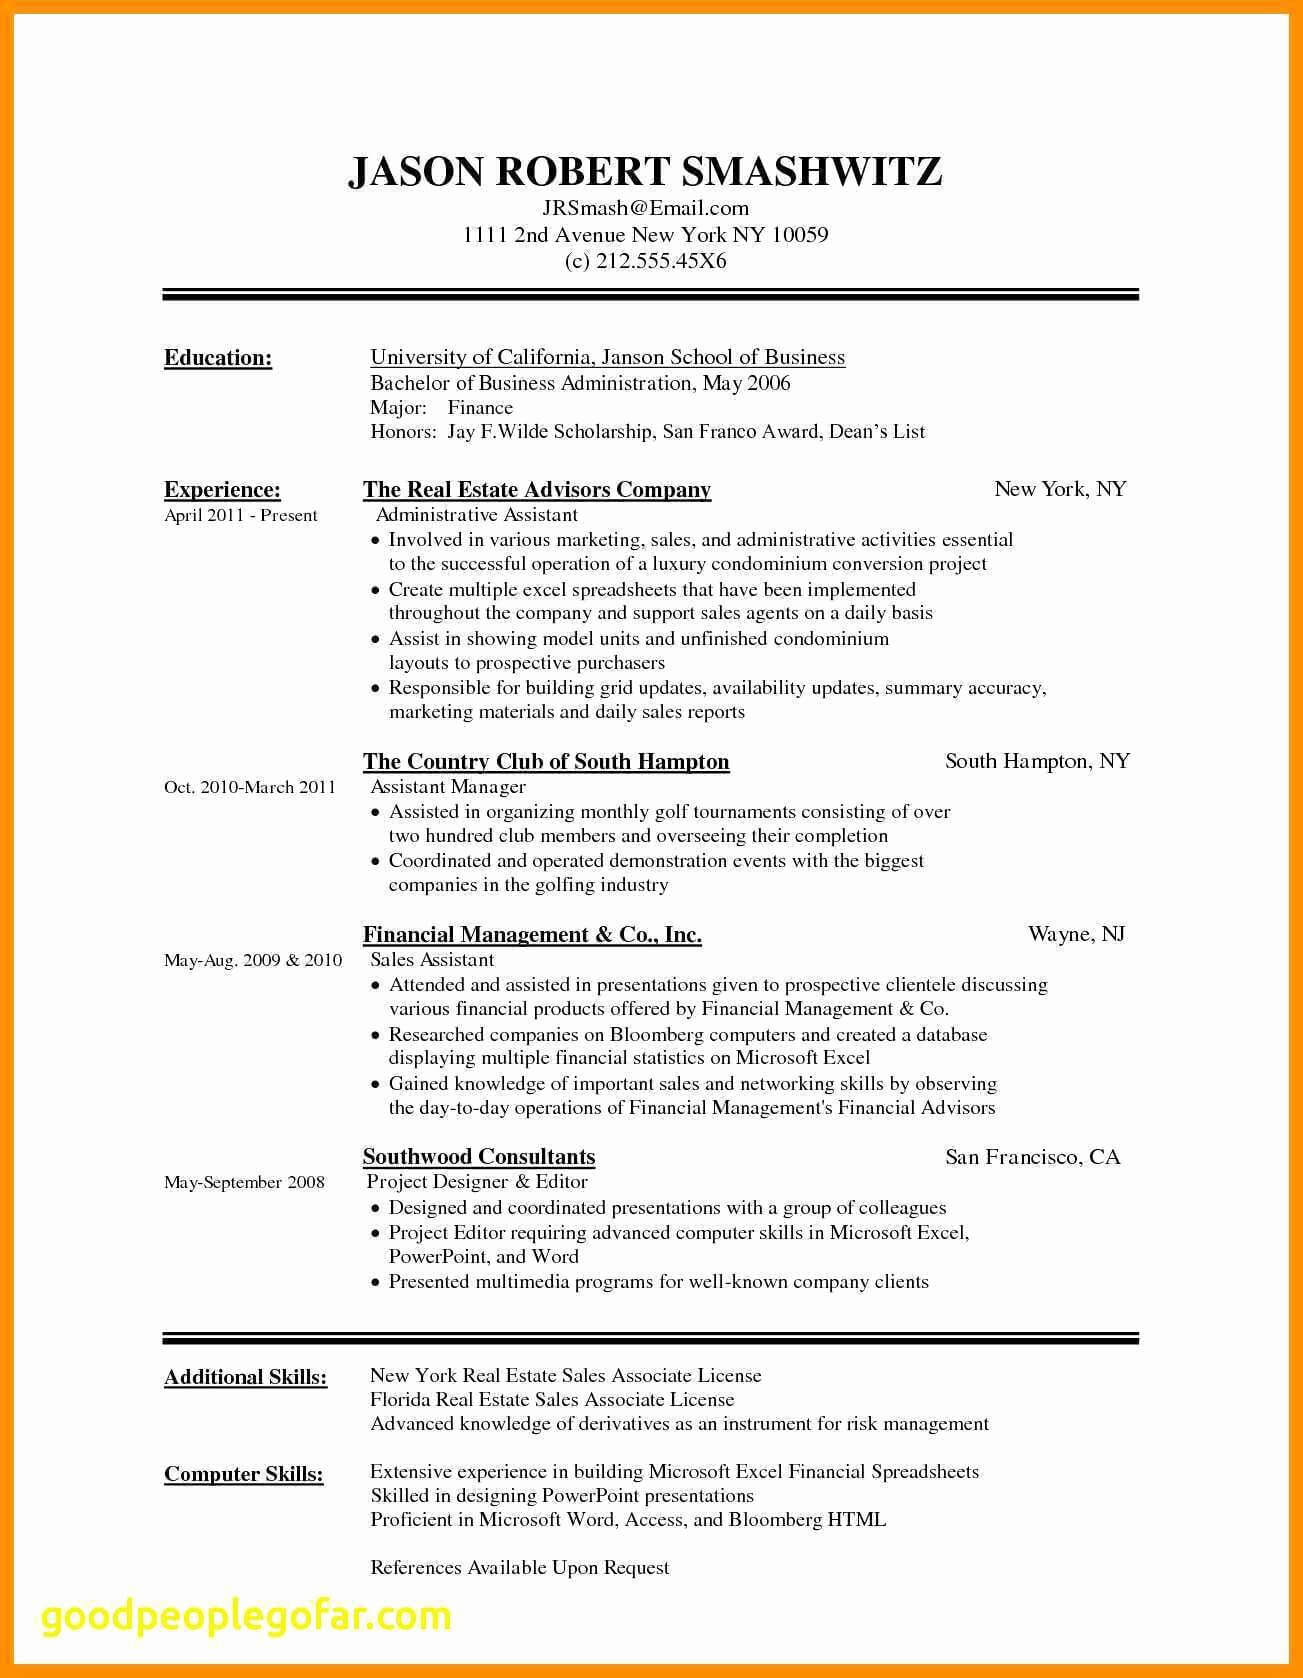 Resume Templates Word 2010 Download Fresh Free How To Use Within Resume Templates Word 2010